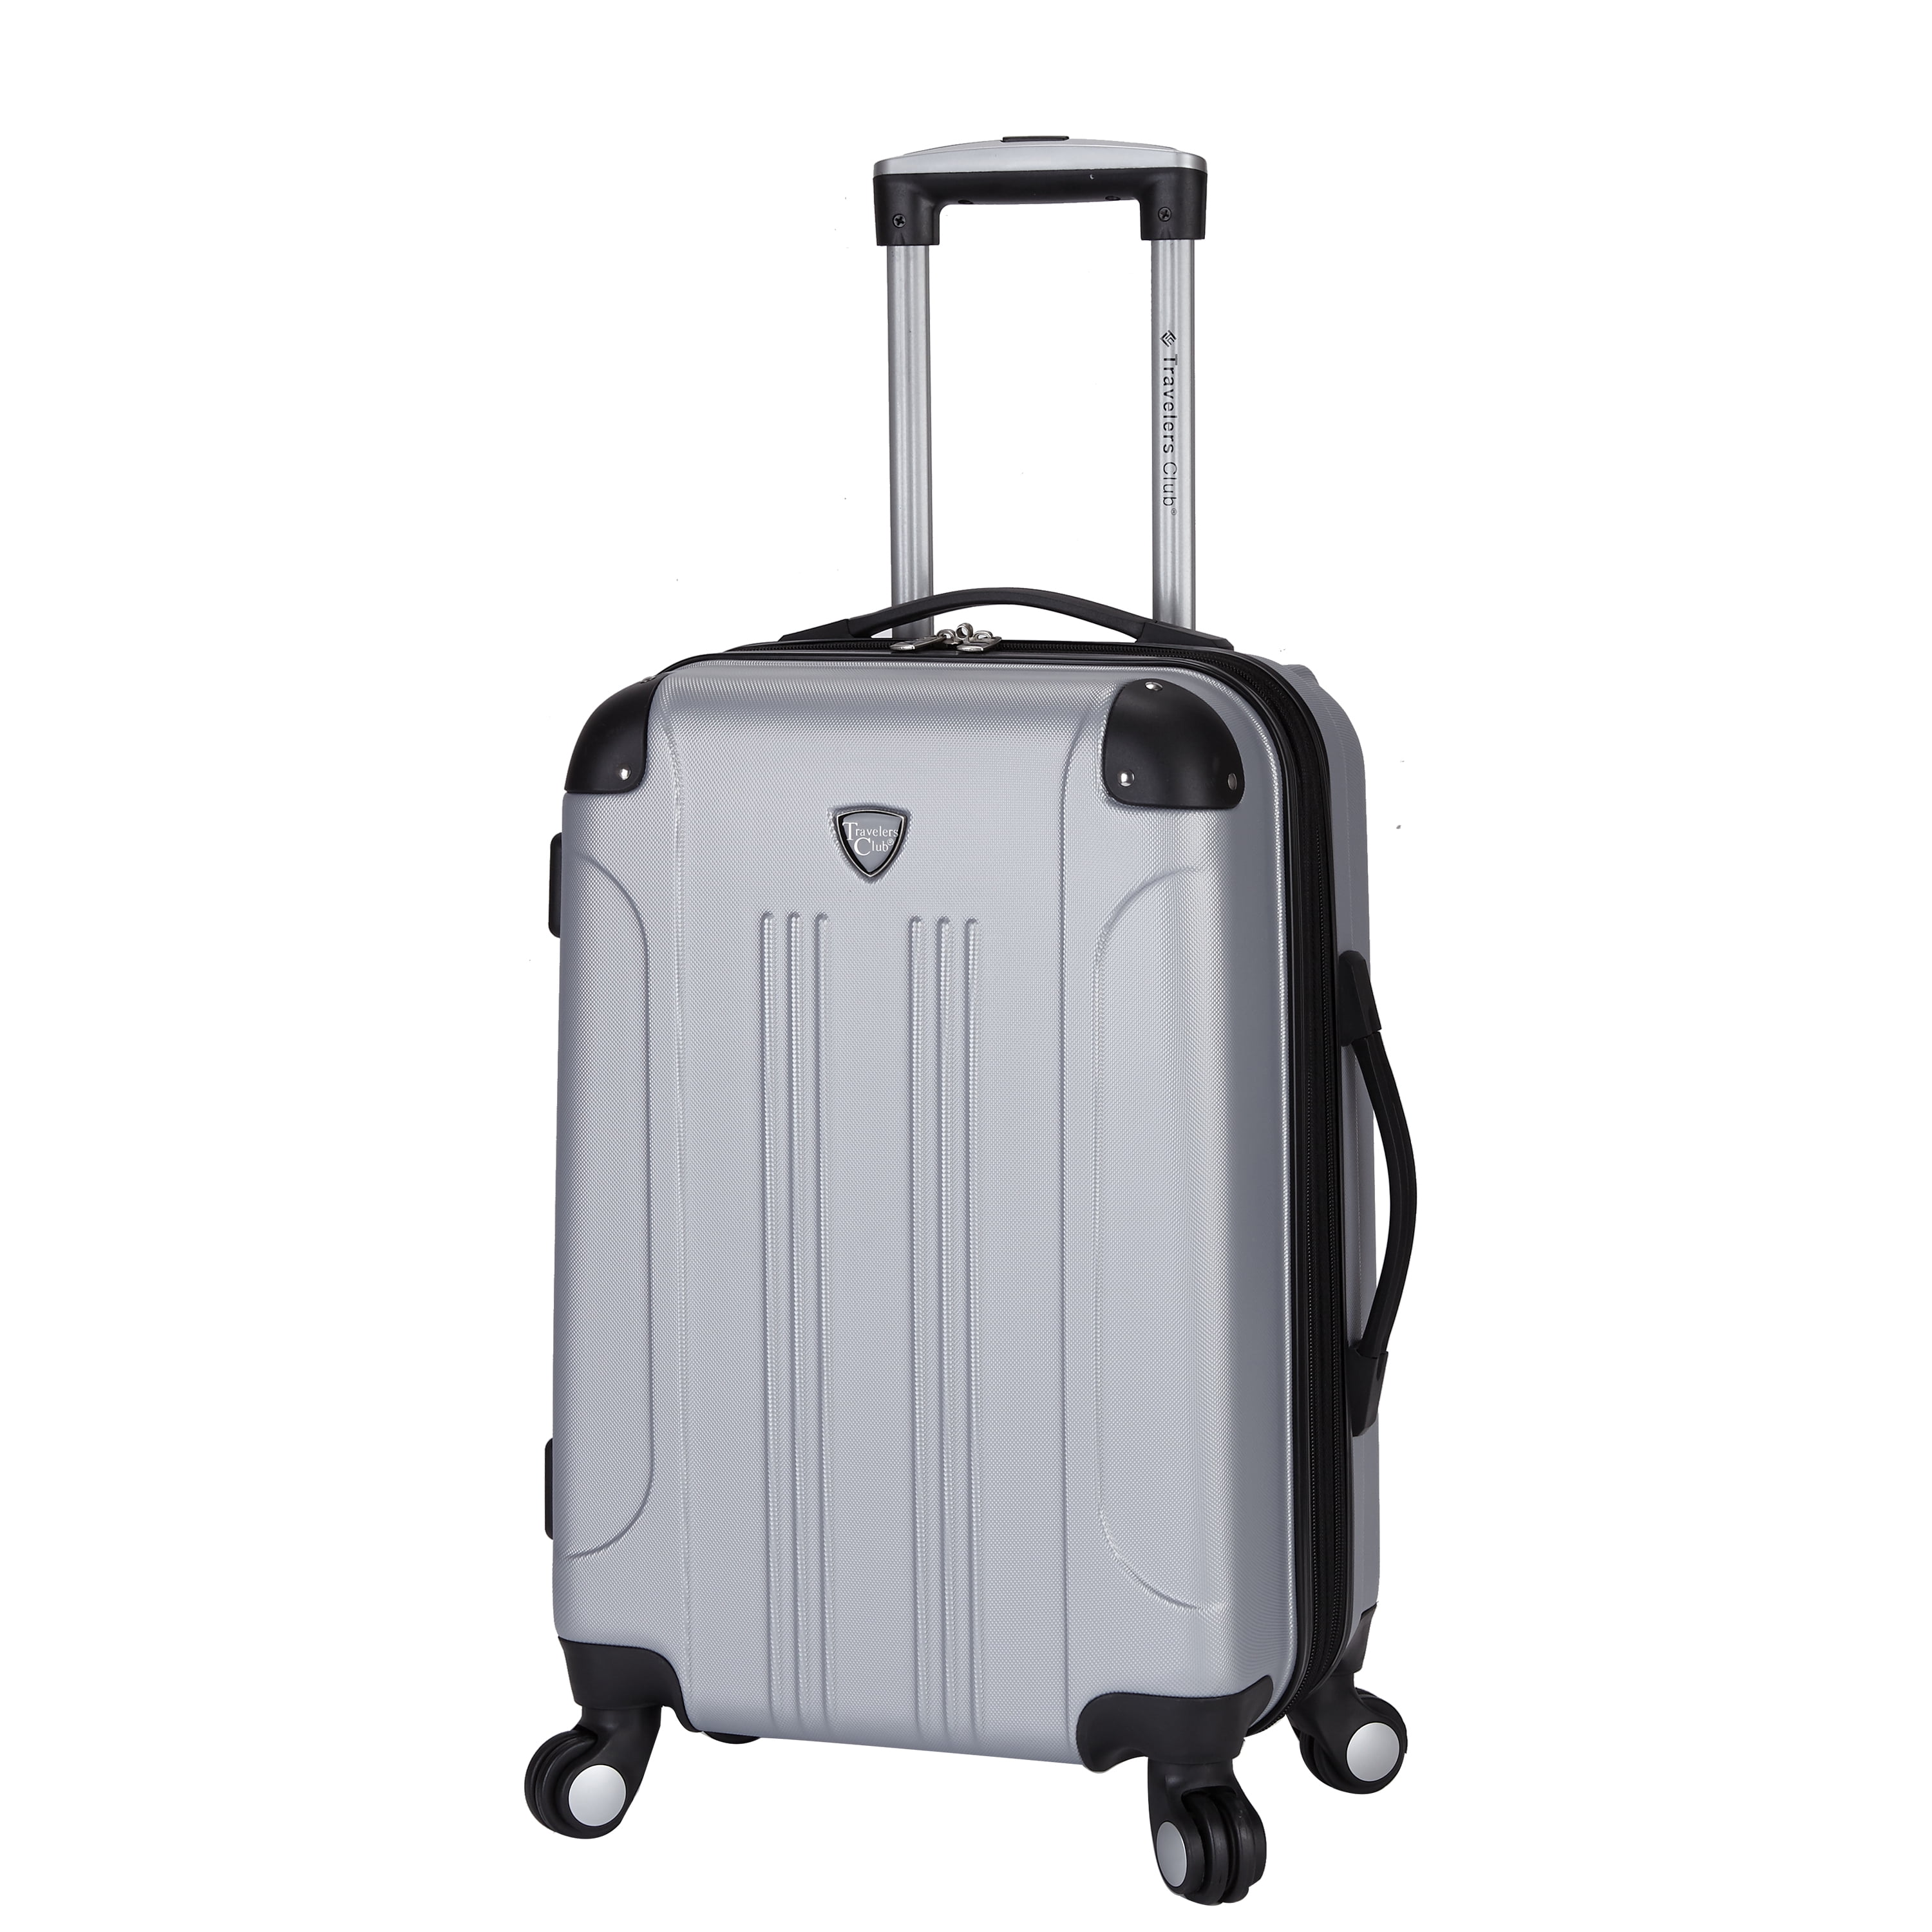 Travelers Club Luggage Chicago II 20 Expandable Spinner Carry-On Luggage Silver 